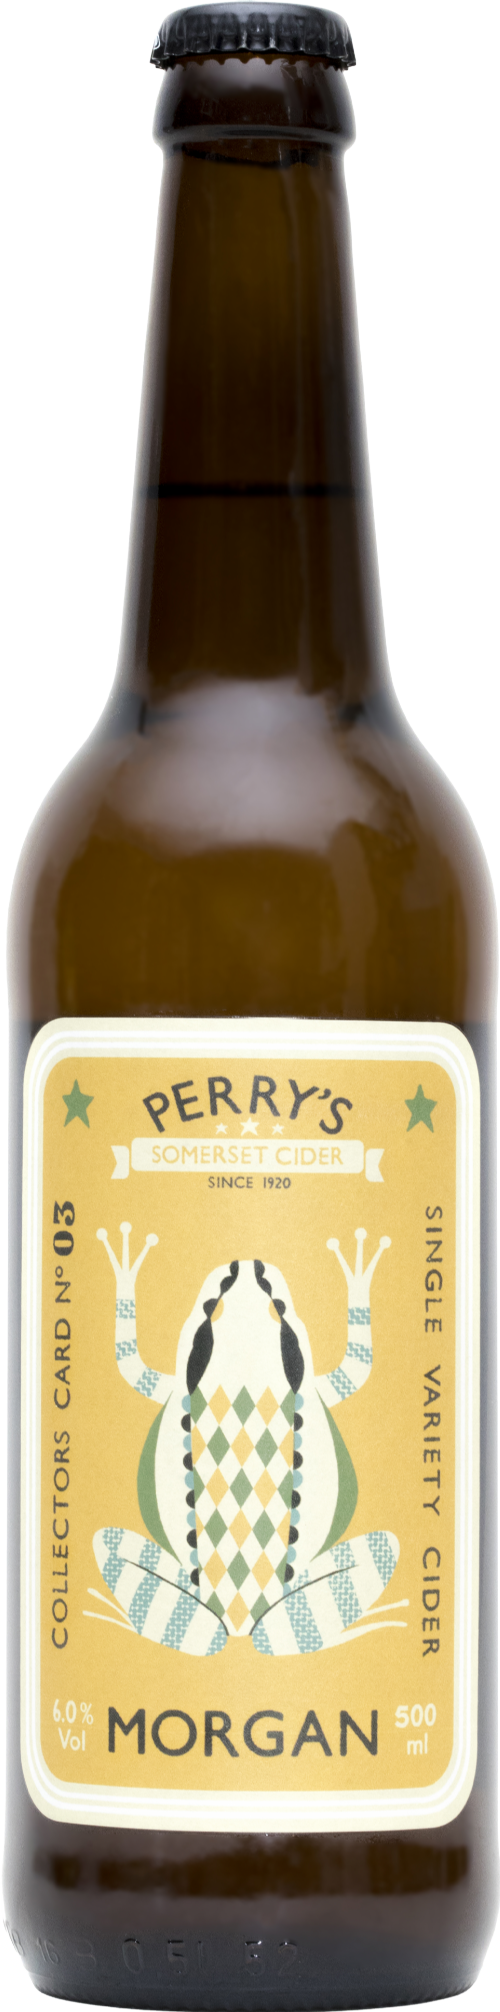 PERRY'S Somerset Morgan Cider 6% ABV 500ml